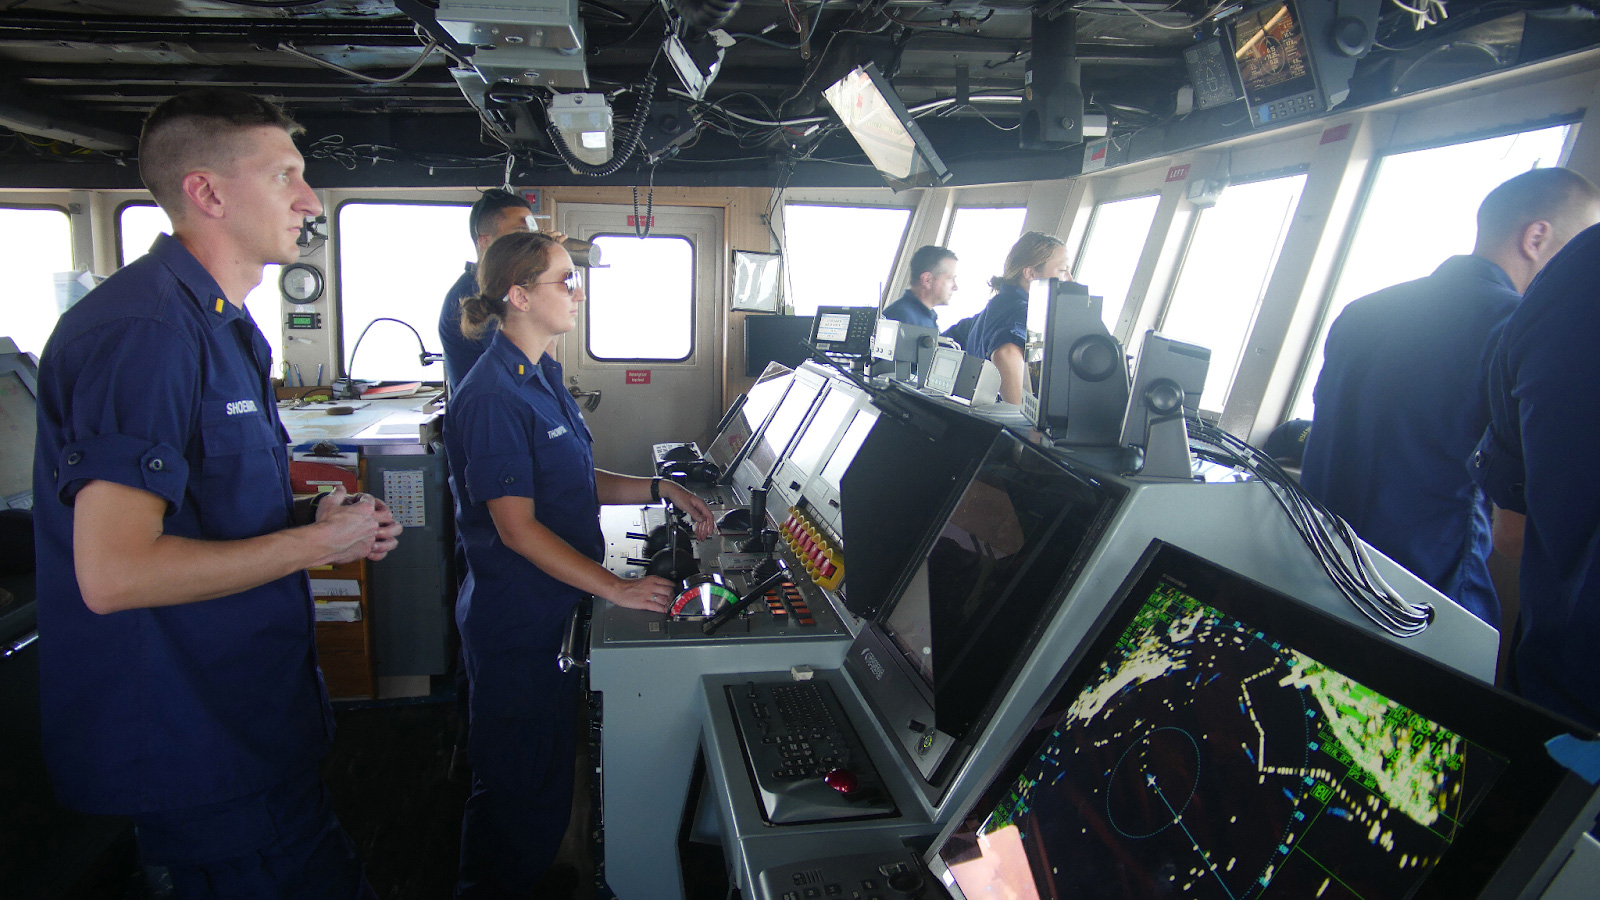 NOAA Corps officers on the bridge of NOAA vessel, Nancy Foster, navigating out at sea.